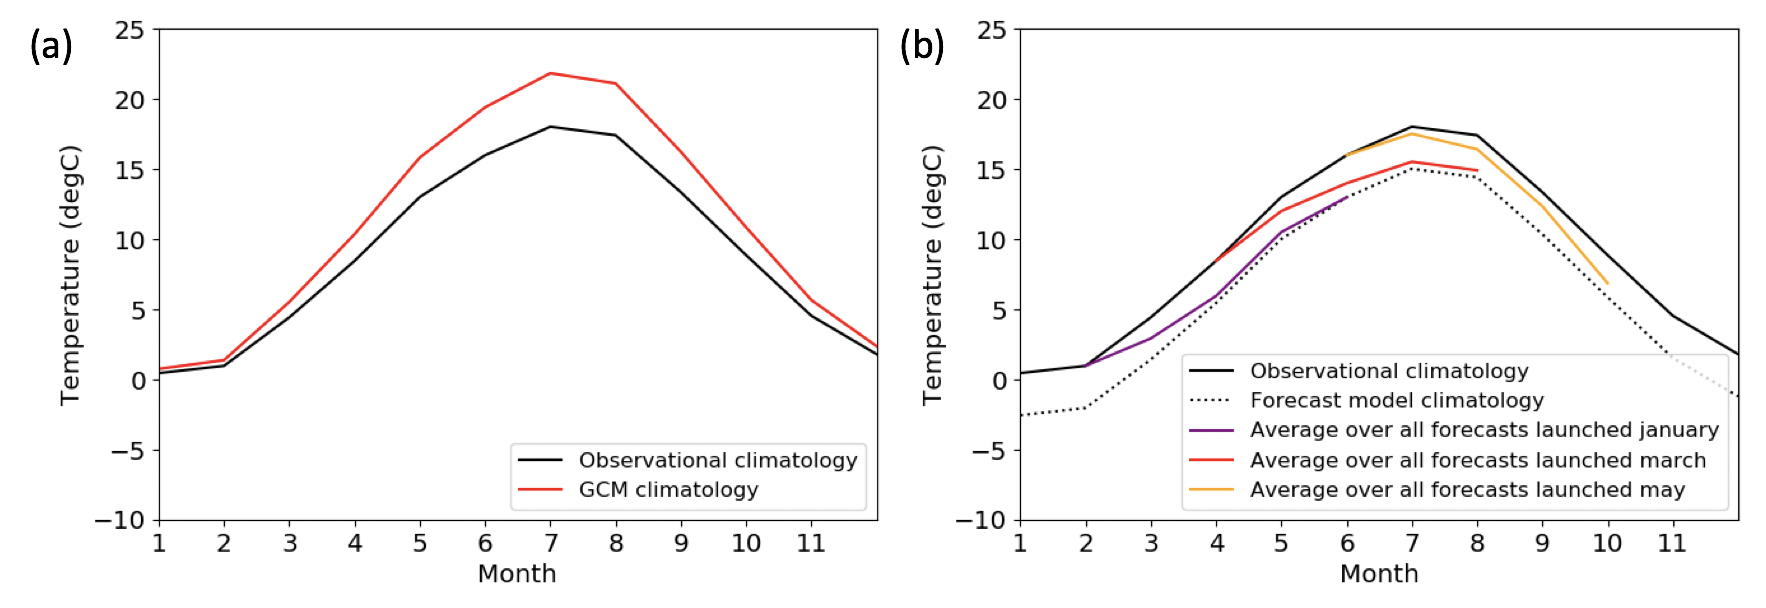 Climate model bias may vary over time, e.g., winter temperatures may be correctly simulated while summer temperatures may be cooler than observed. Moreover, extended-range climate forecasts (weeks to months ahead) tend to gradually increase their bias over time, drifting from the observed state towards the model’s preferred internal climatology. This leads to the concept of lead-time dependent bias in climate foreacsts.